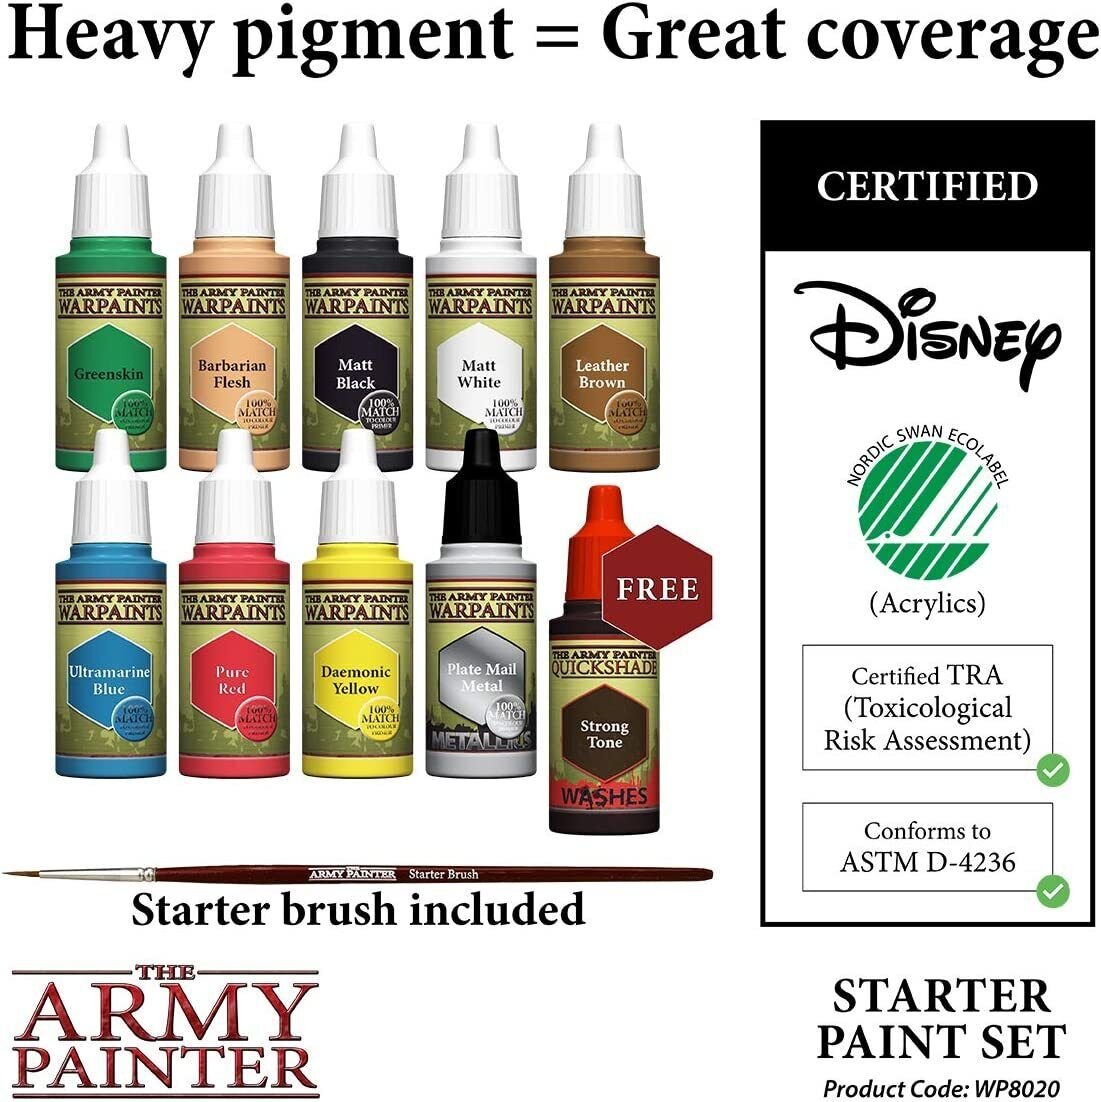 The Army Painter Wargame Starter Paint Set